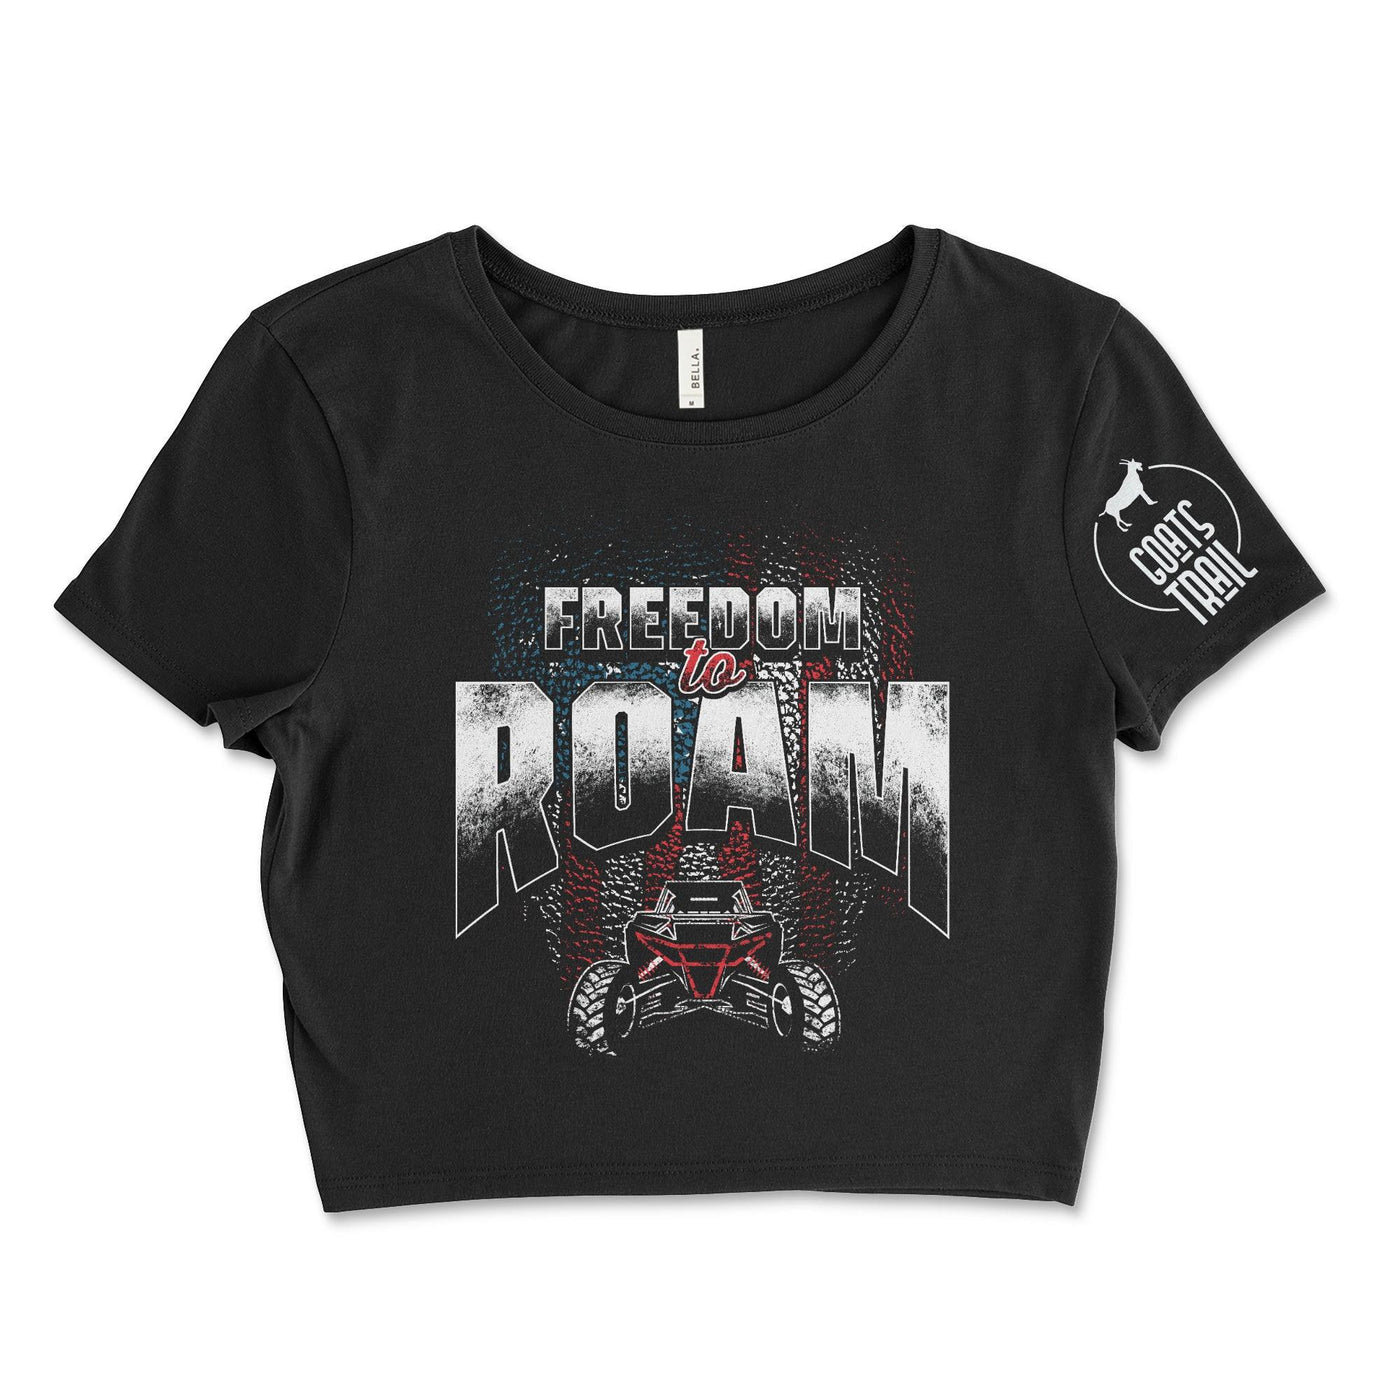 Freedom Patriotic Crop Top - Goats Trail